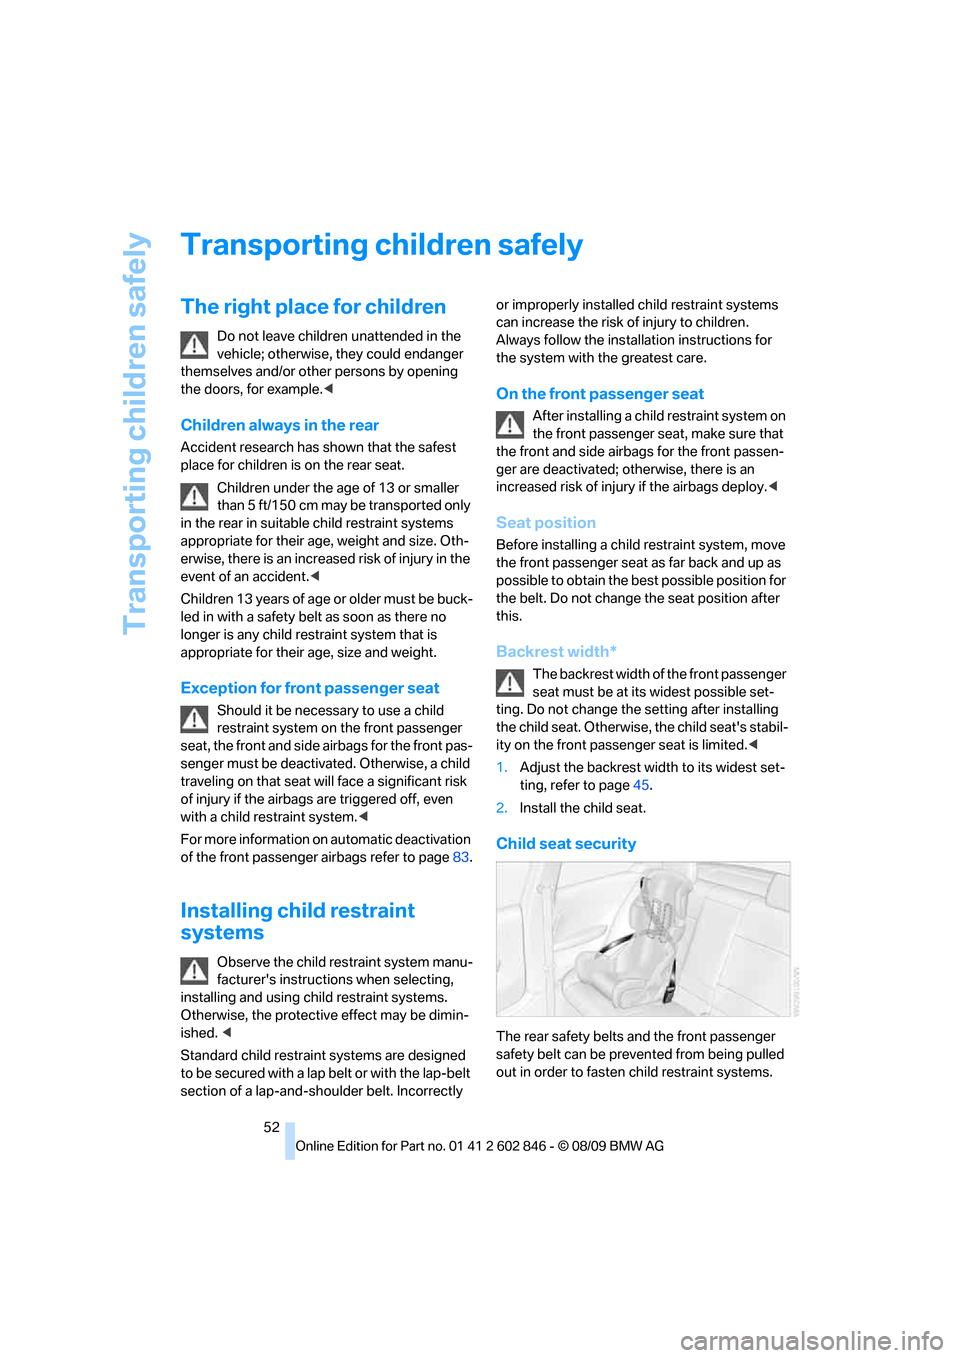 BMW 128I 2010 E81 Workshop Manual Transporting children safely
52
Transporting children safely
The right place for children
Do not leave children unattended in the 
vehicle; otherwise, they could endanger 
themselves and/or other pers